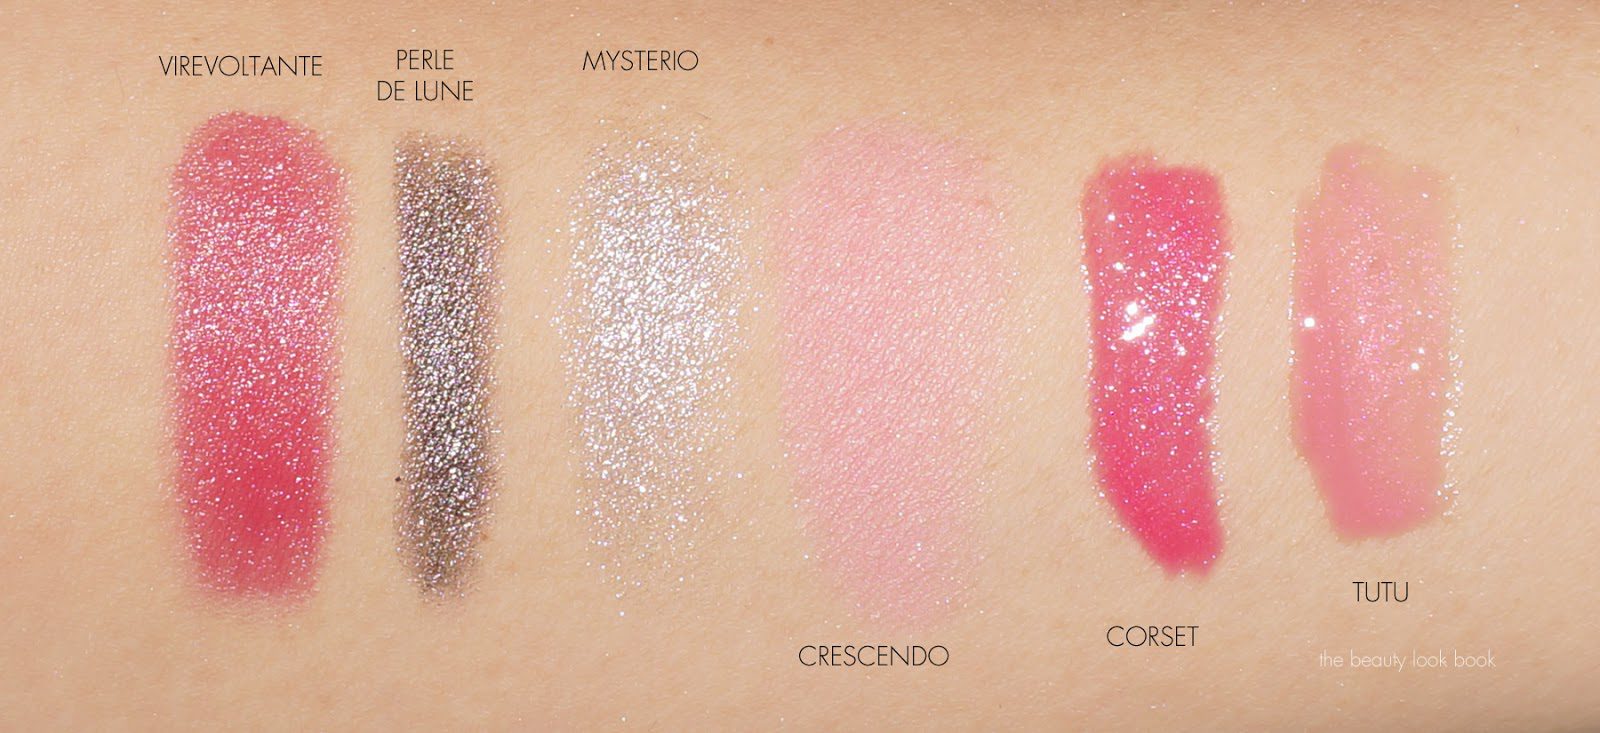 Chanel Mysterio Illusion D'Ombre and Perle de Lune Stylo Yeux Waterproof -  The Beauty Look Book